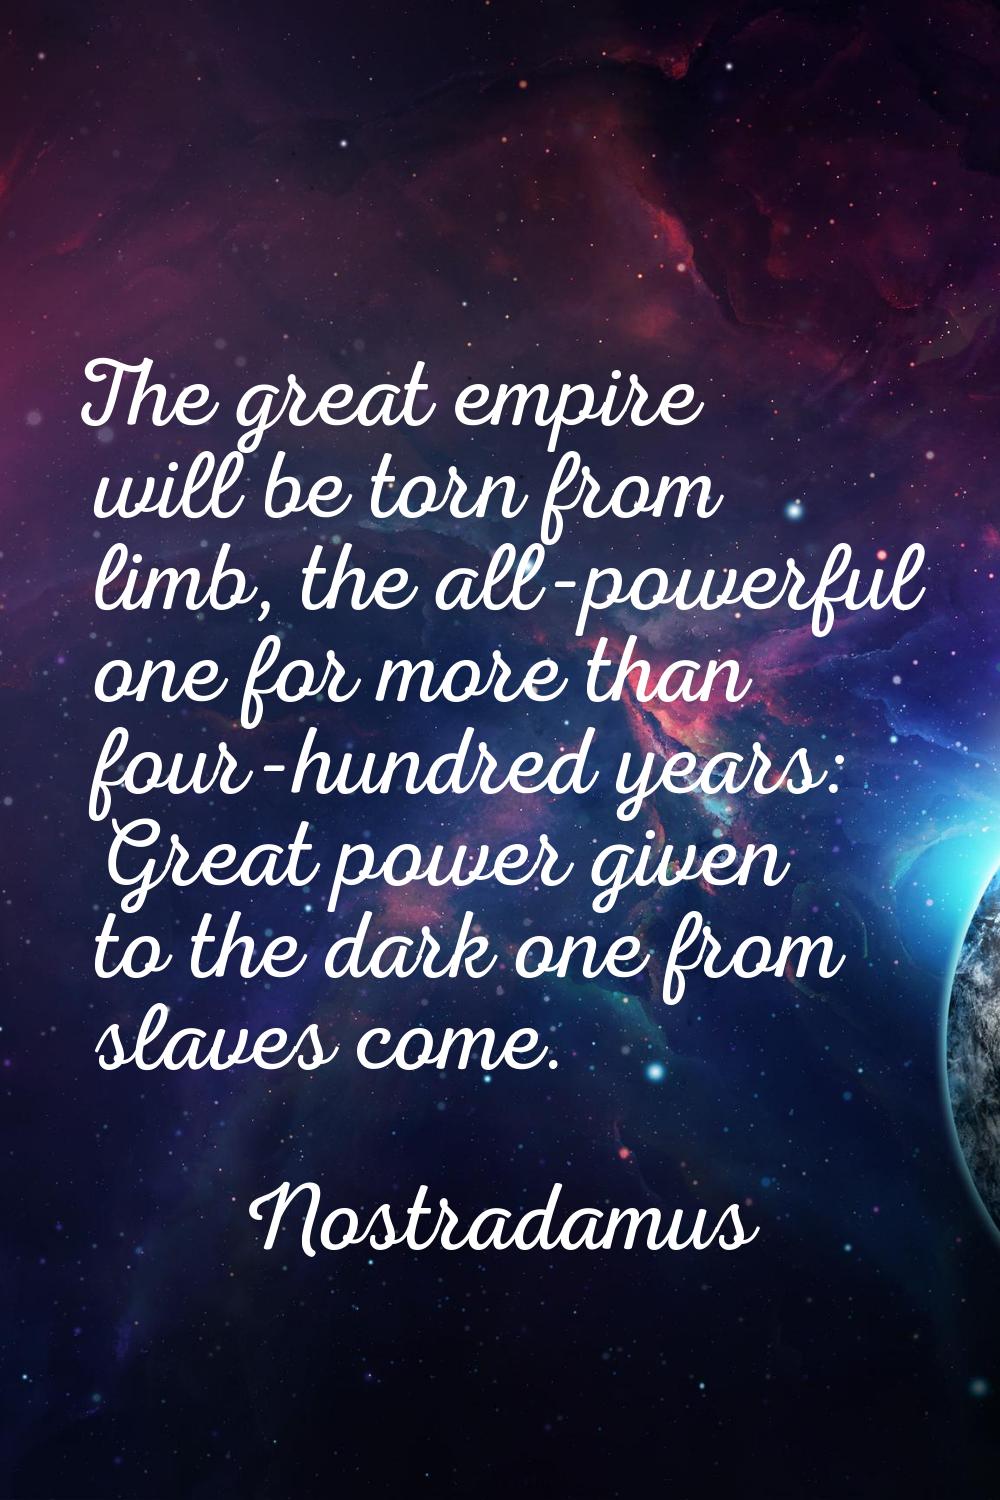 The great empire will be torn from limb, the all-powerful one for more than four-hundred years: Gre